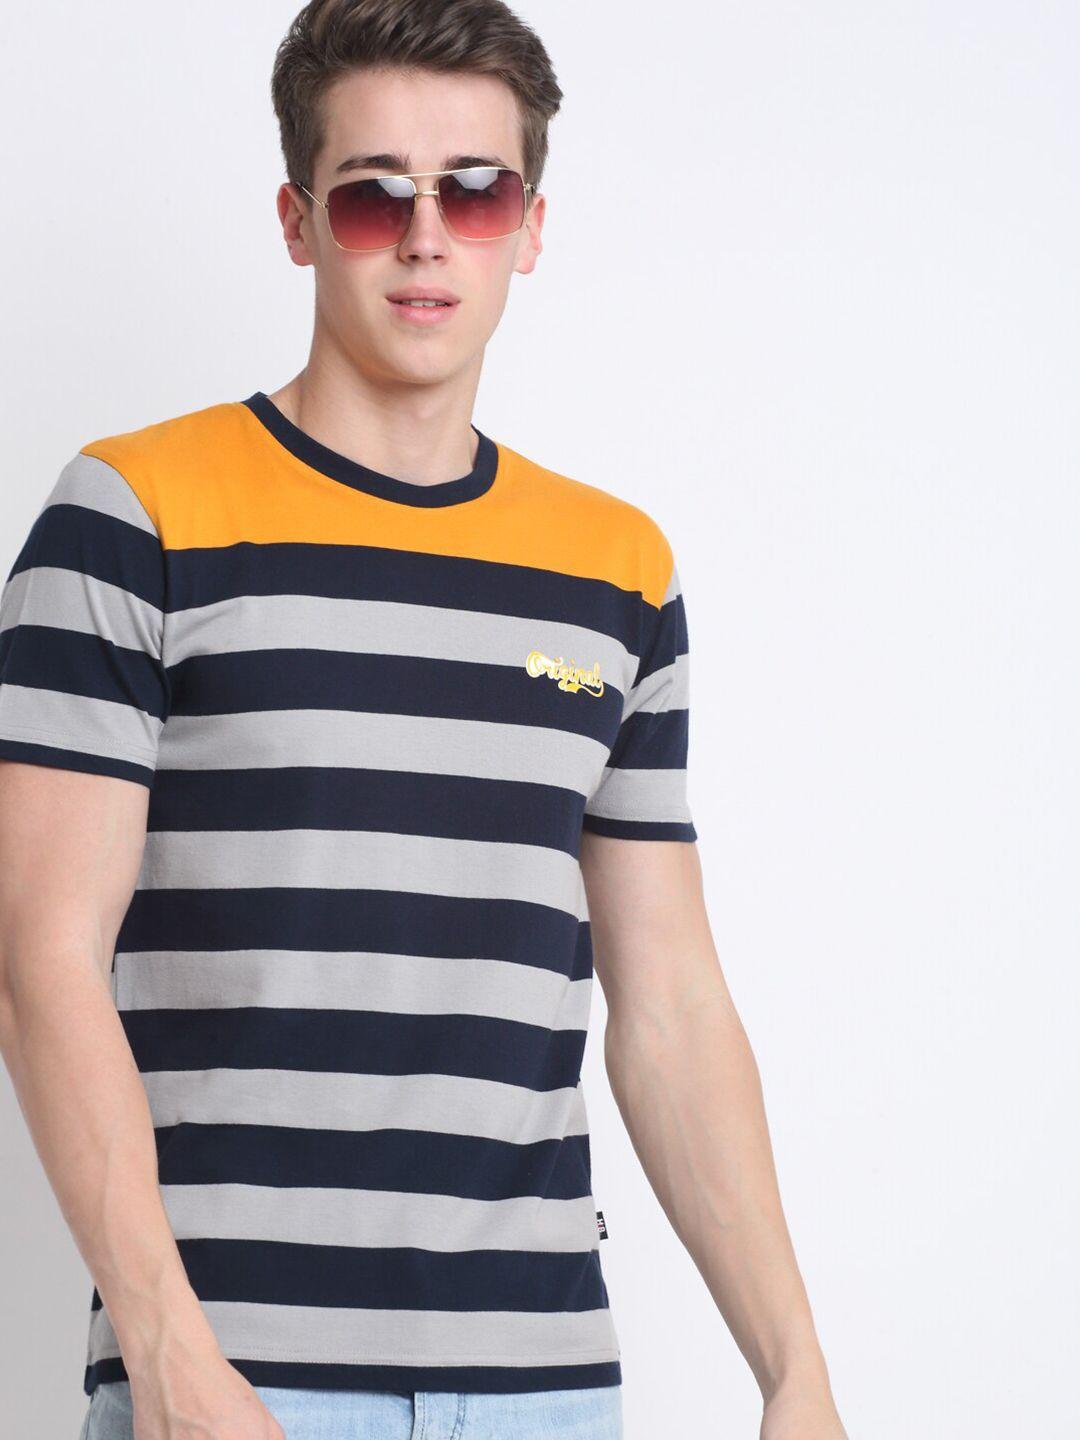 harbor n bay men yellow striped extended sleeves applique t-shirt